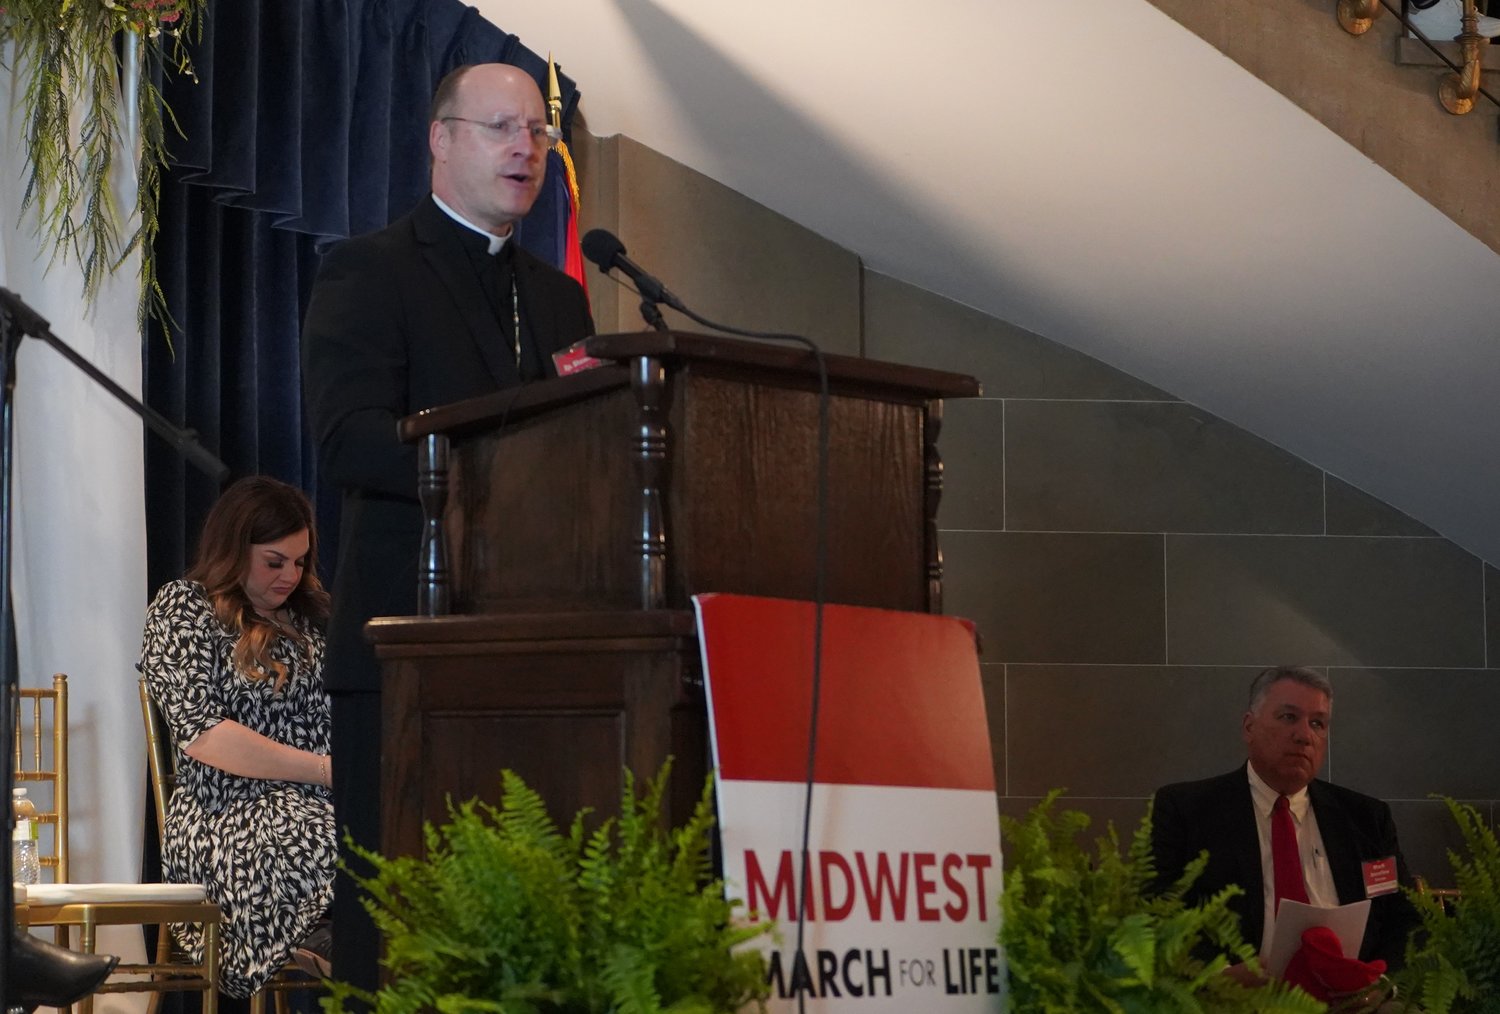 Bishop W. Shawn McKnight speaks to the crowd in the Rotunda of the Missouri State Capitol April 20 during a rally for the Midwest March for Life. Visible in the photo are keynote presenter Abby Johnson and Mark Serafino, master of ceremonies for the event. Mrs. Johnson is answering a woman who text-messaged her with searing regret over having recently had a late-term abortion.